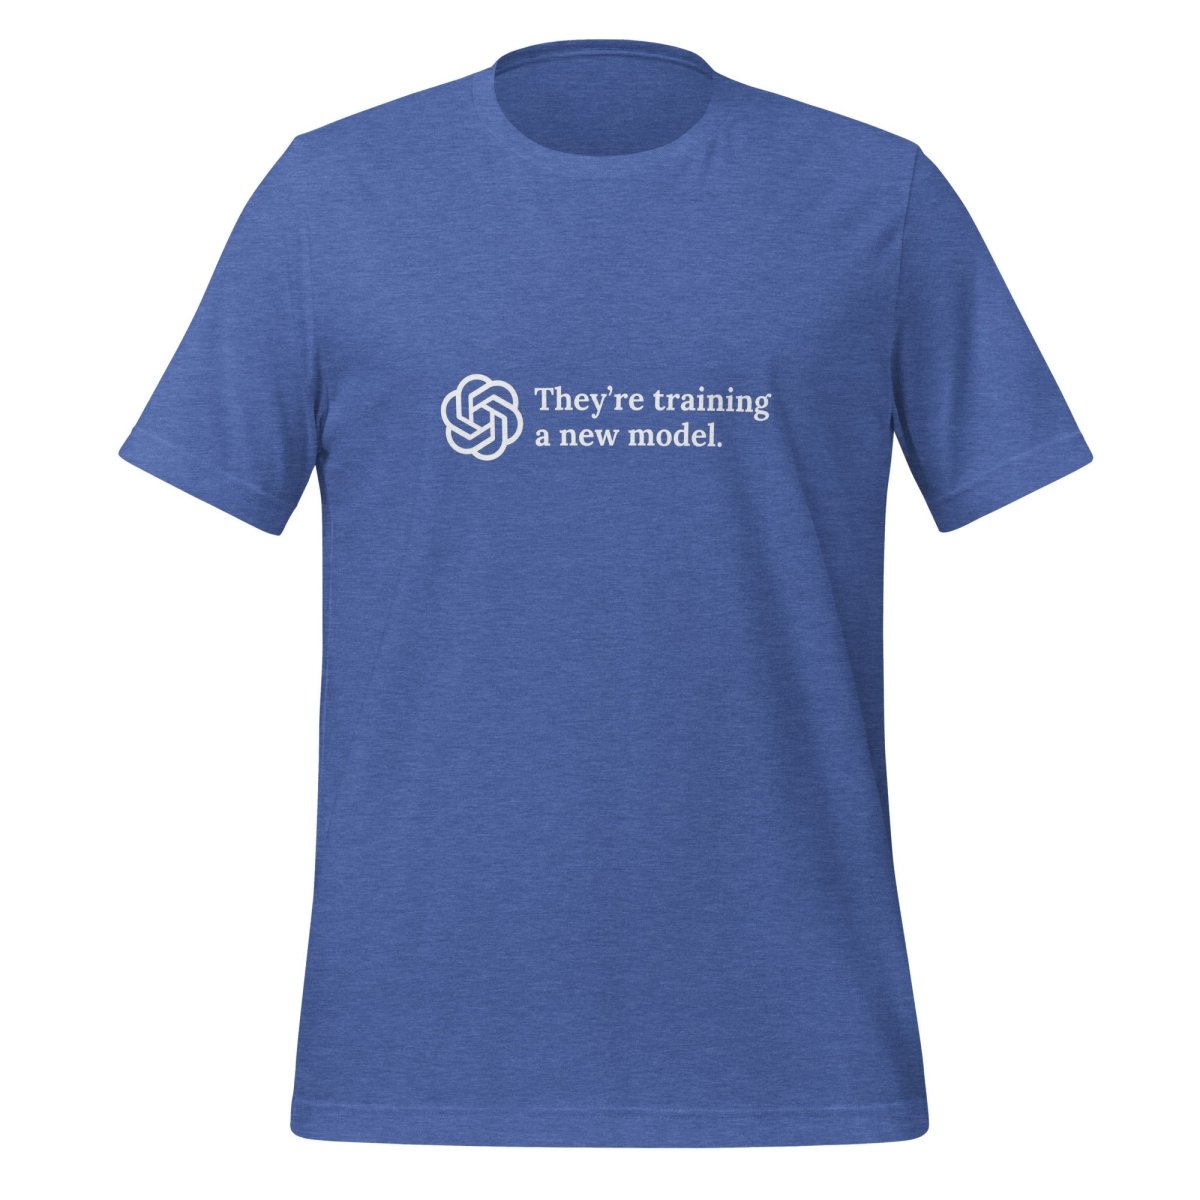 They're training a new model. T - Shirt (unisex) - Heather True Royal - AI Store